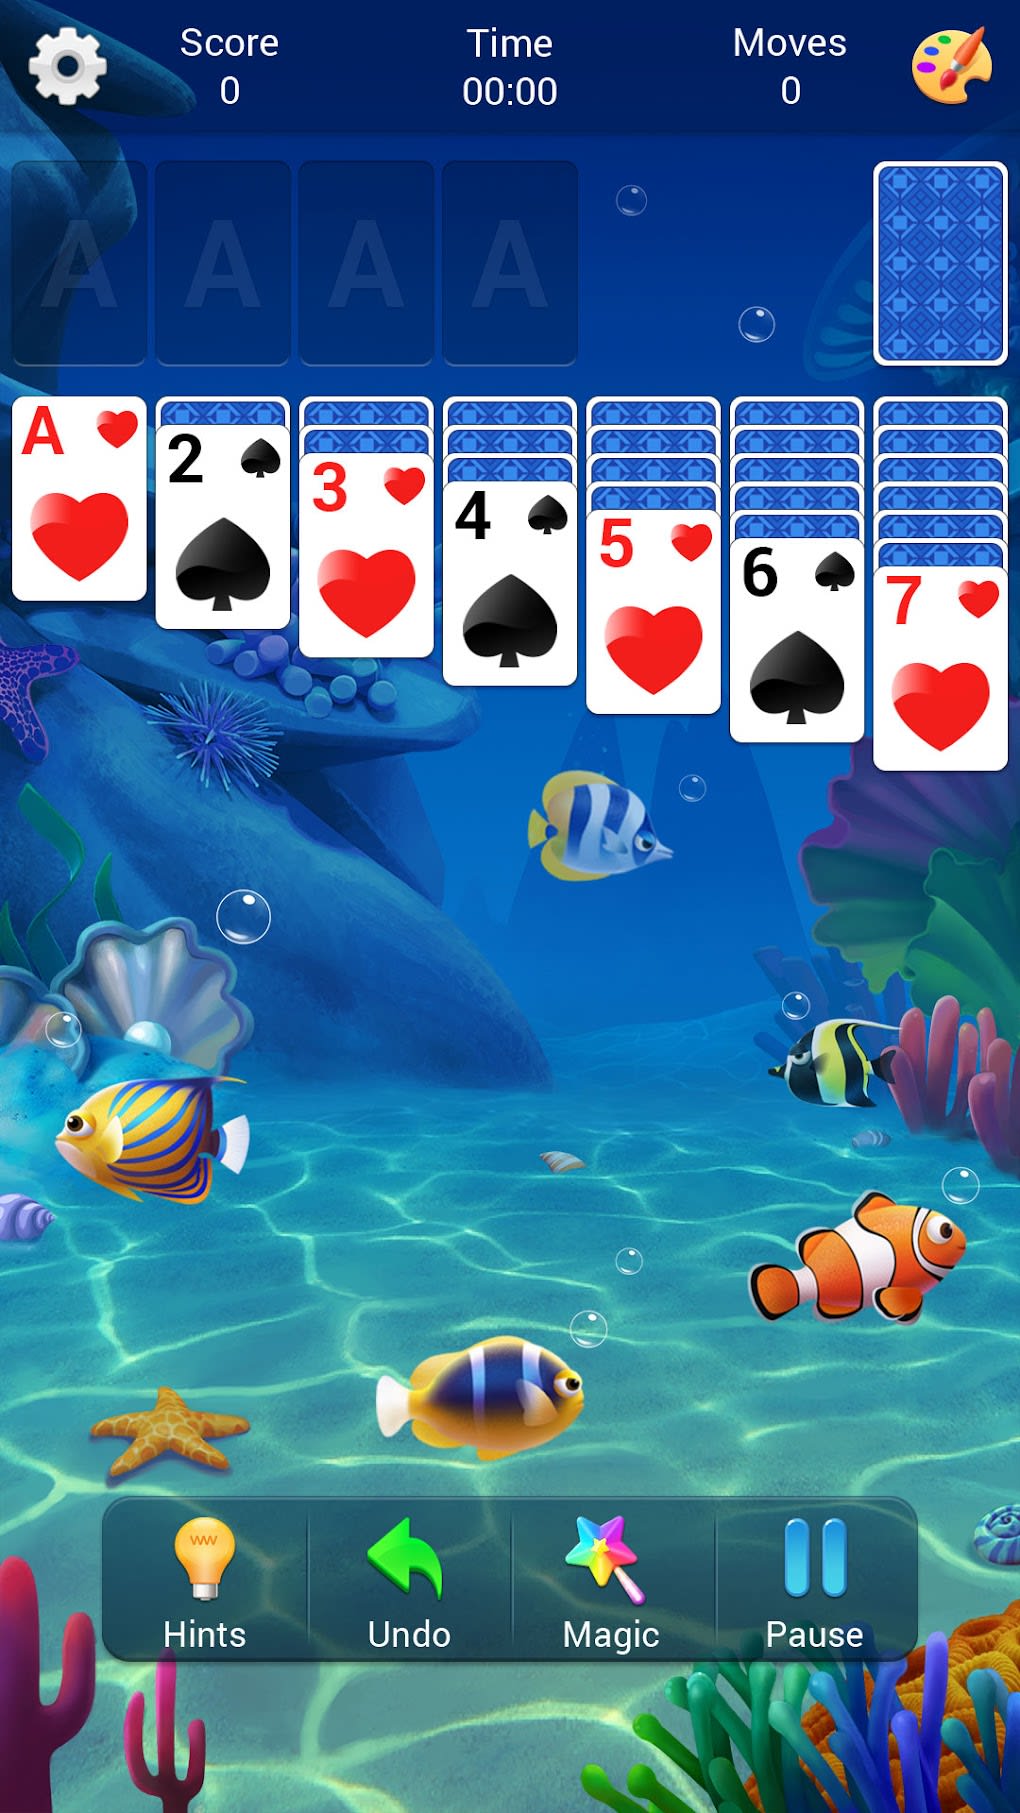 Solitaire - Classic Solitaire Card Game para Android - Descargar